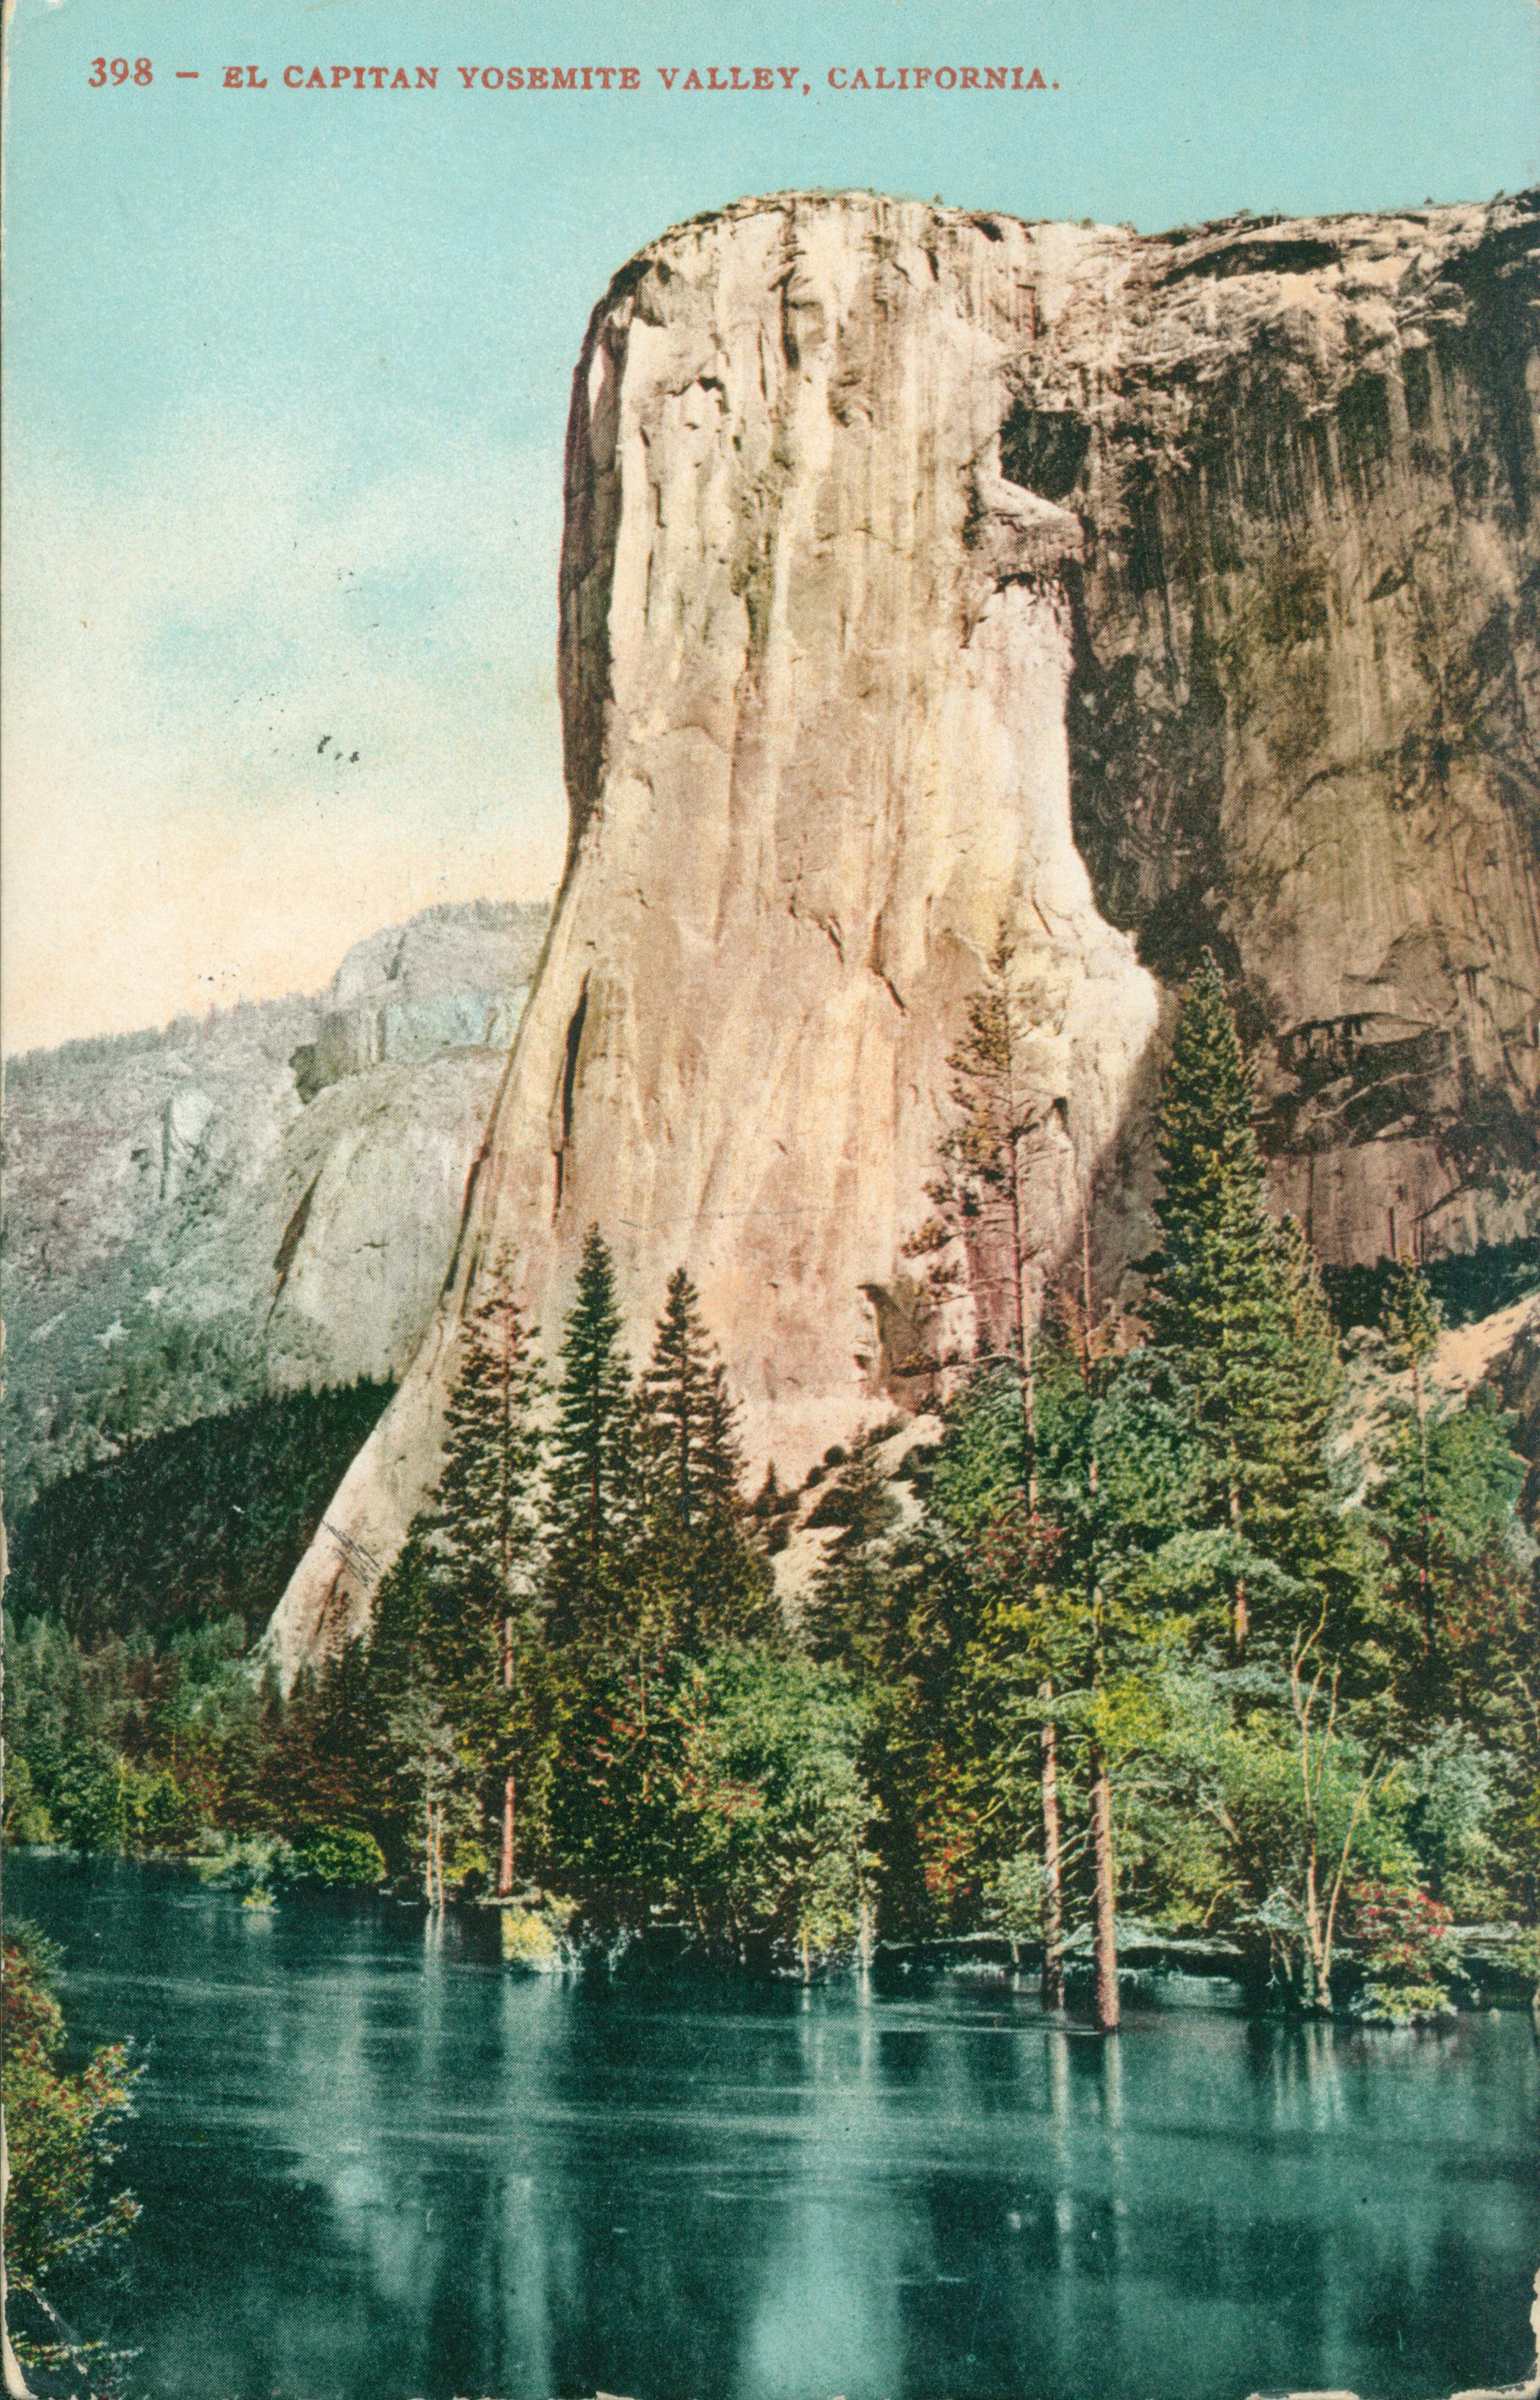 Shows El Capitan looming above a tree-lined river